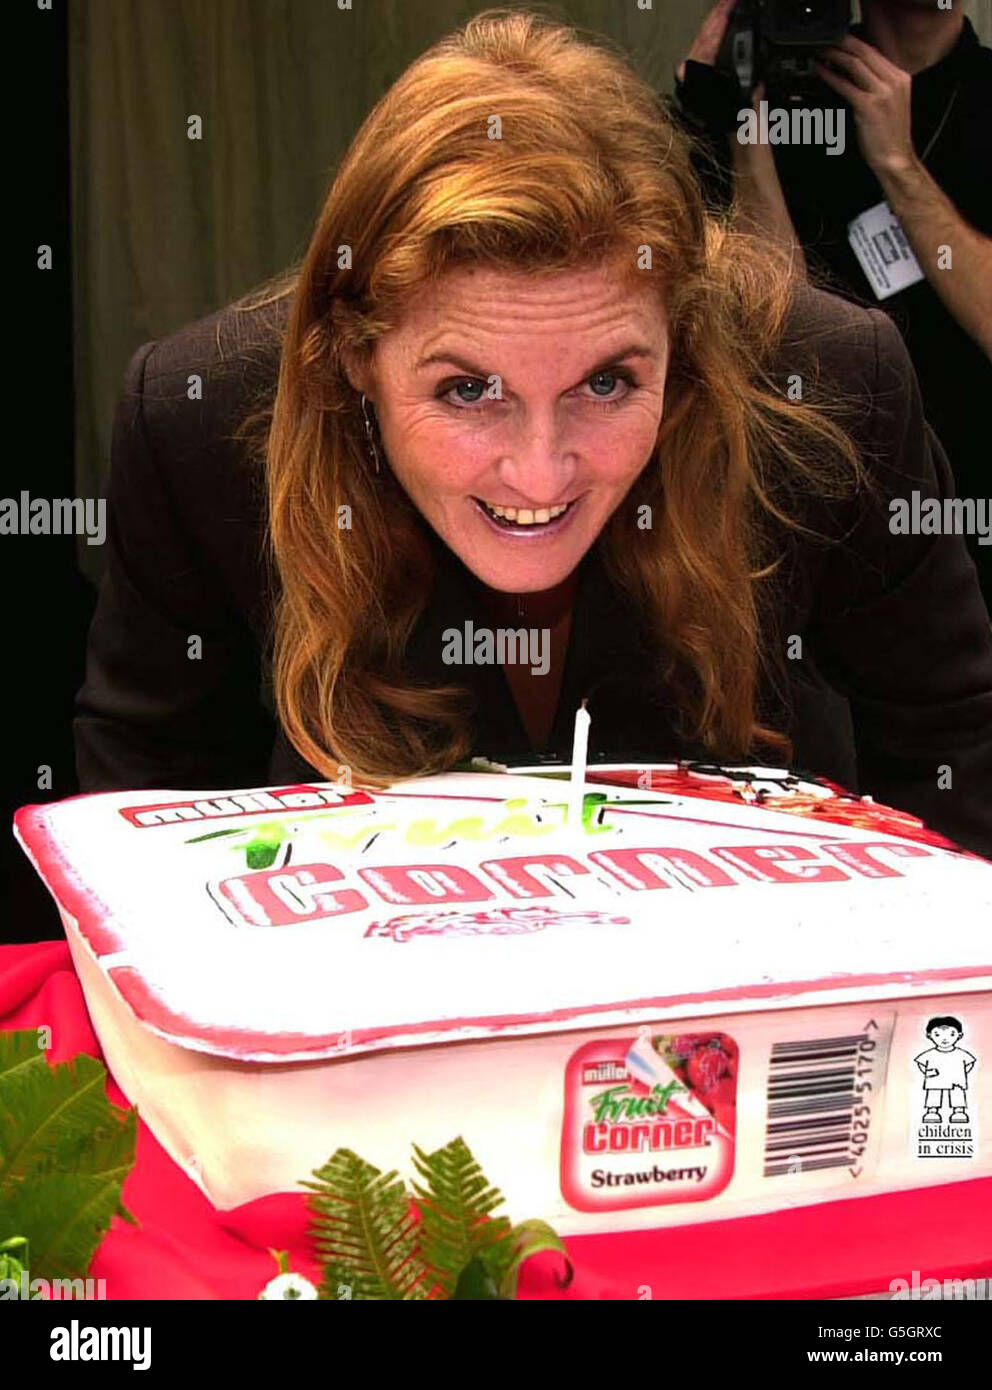 Sarah, the Duchess of York, Founder and Life President of the charity Children in Crisis blow out a candle on a cake after officially opening the Muller yogurt and dairy dessert company's 55 million factory extension in Market Drayton, Shropshire, on her 42nd Birthday. * Muller announced a formal link with the charity. Stock Photo